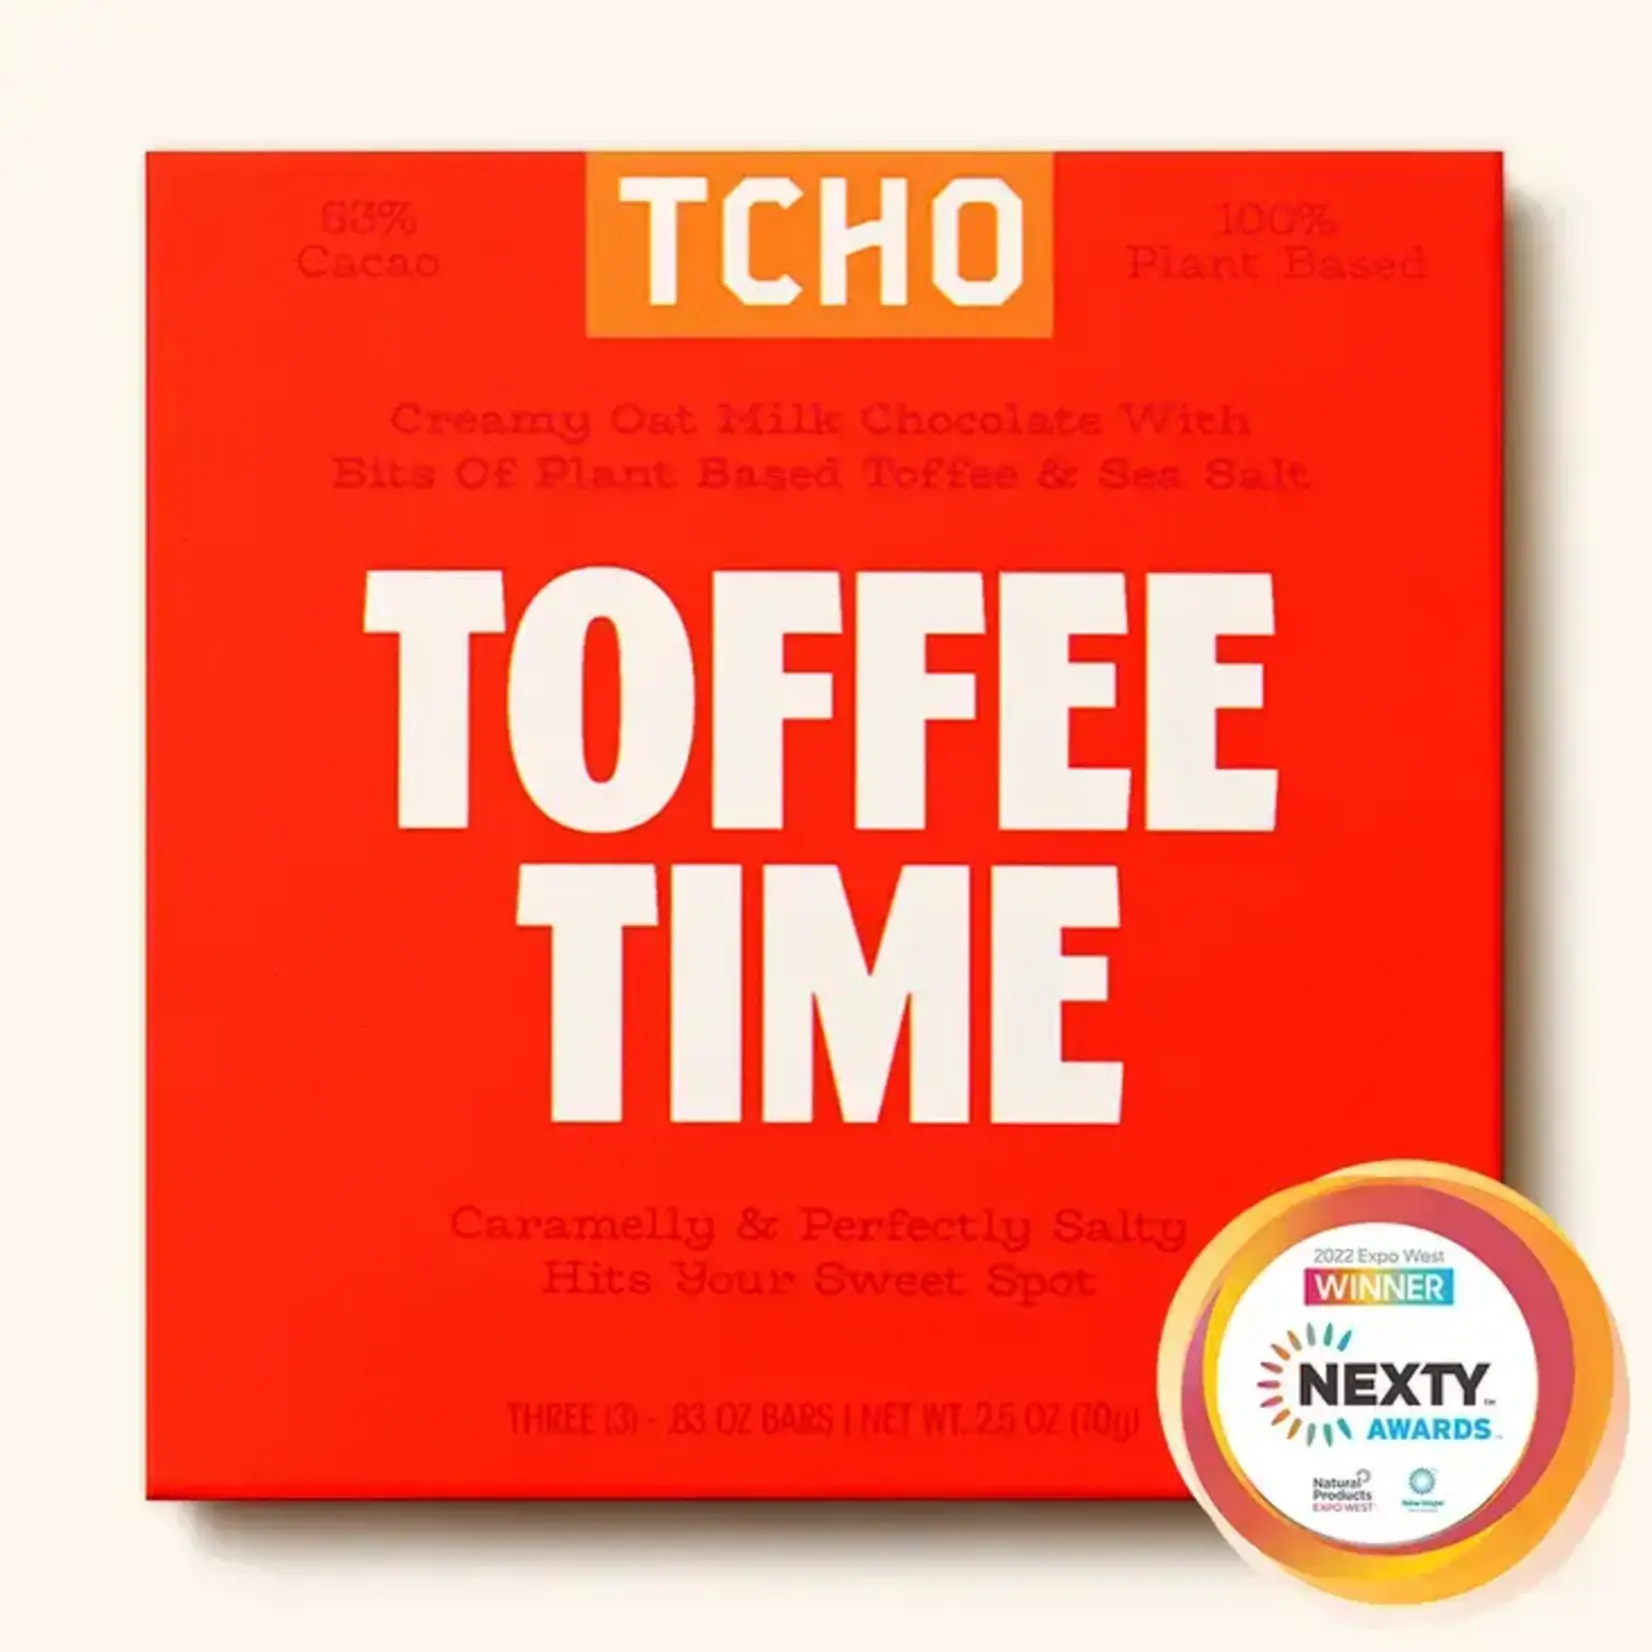 TCHO Toffee Time, Vegan Chocolate